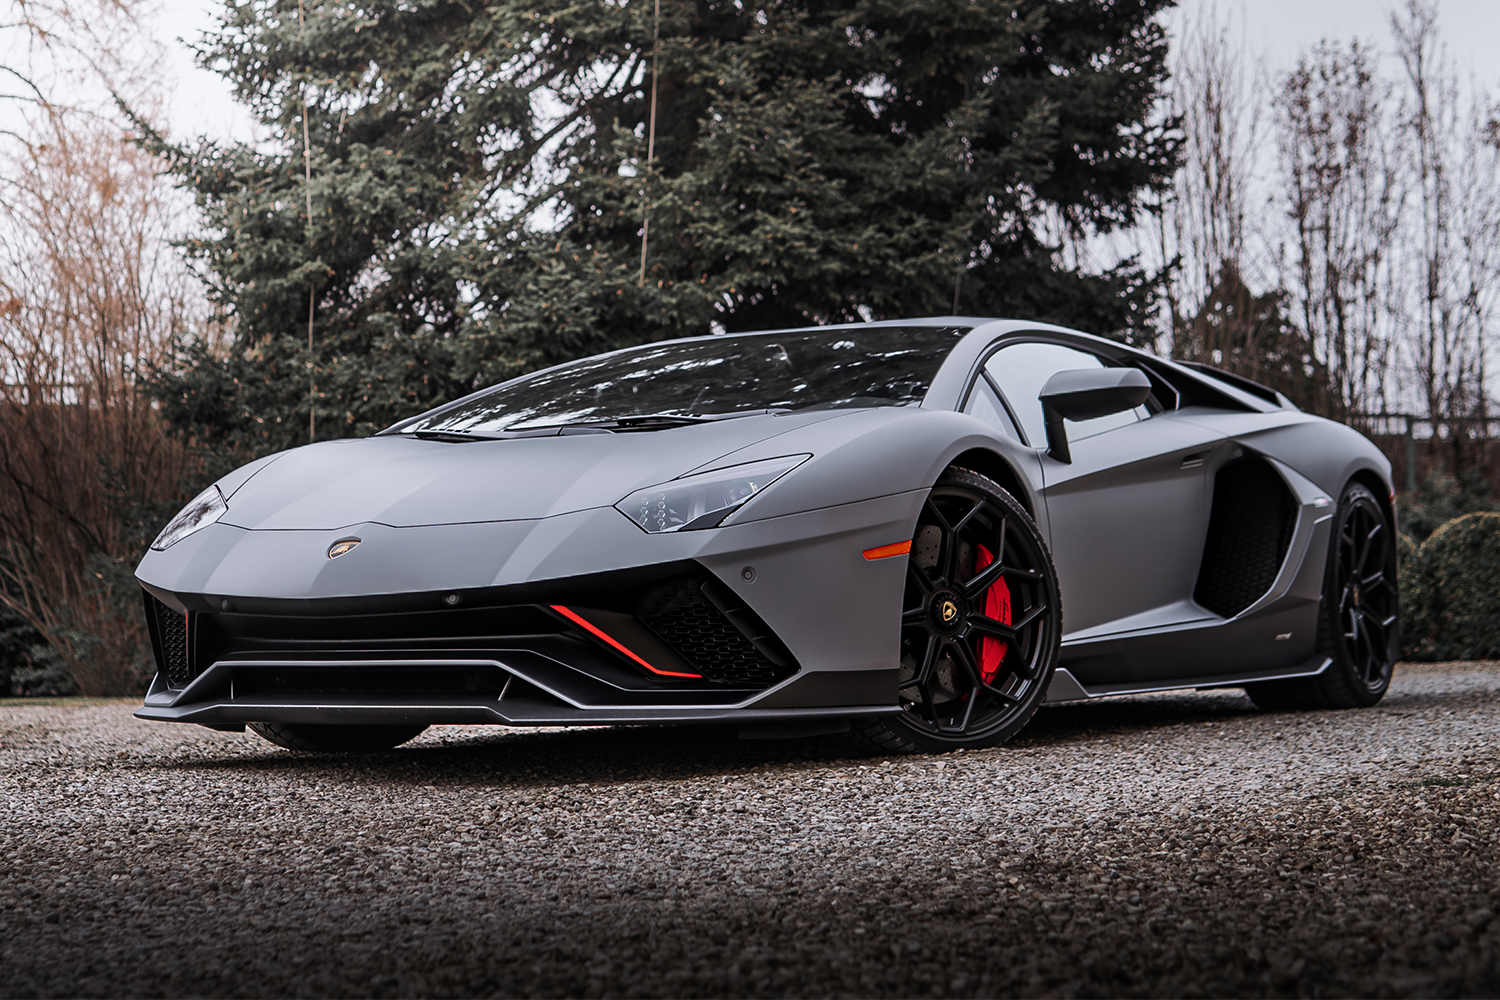 The Aventador LP 780-4 Ultimae in grey with red and black accents sits still on a gravel drivea